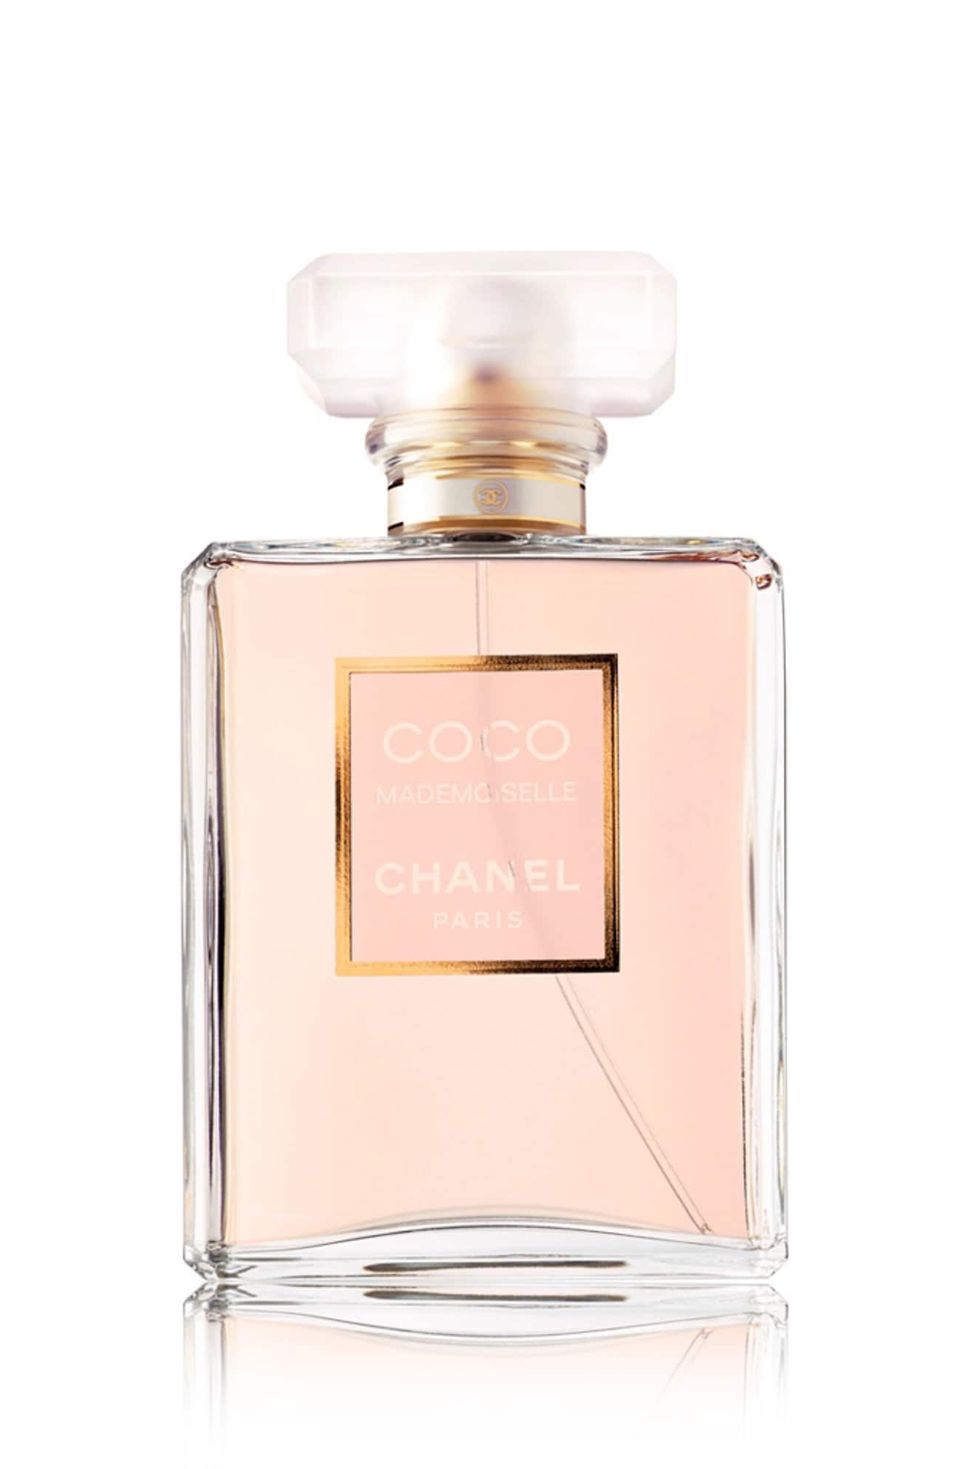 25 Best Long-Lasting Perfumes for Women in 2023